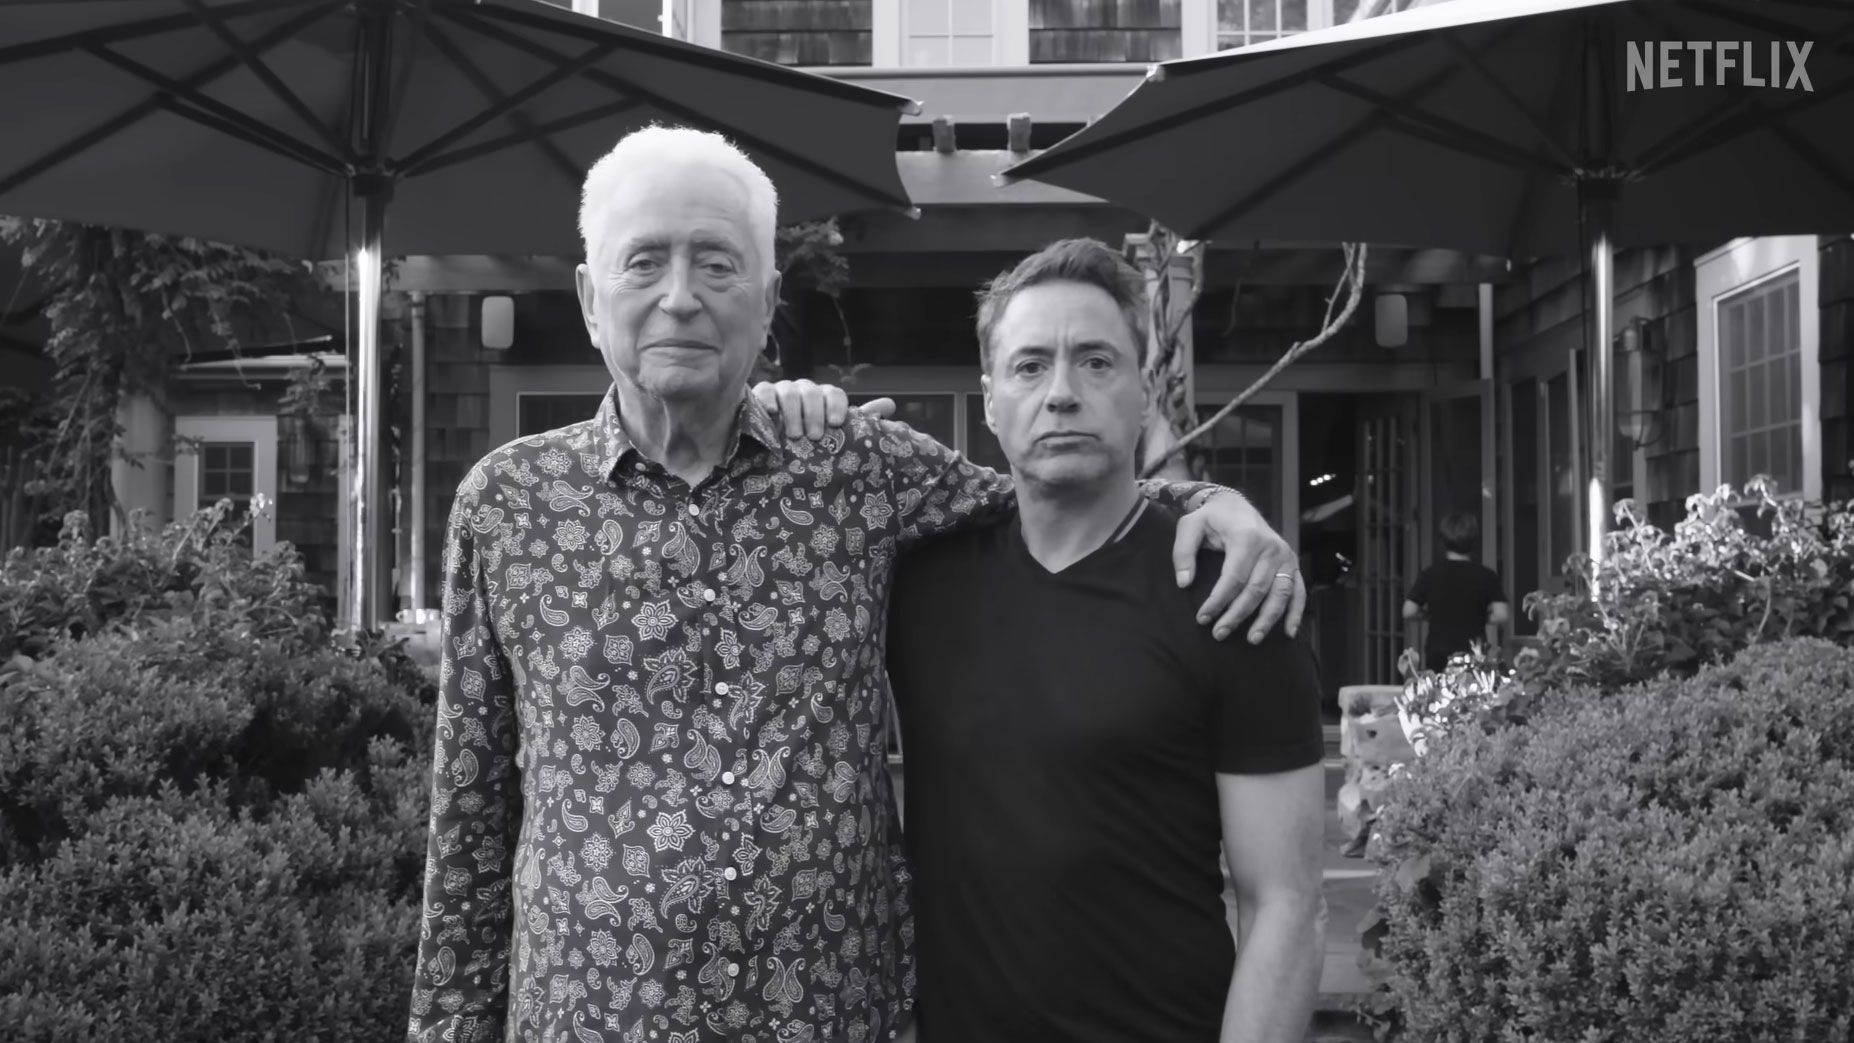 Sr.' review: Robert Downey Jr. deals with his late dad in an intimate Netflix documentary | CNN